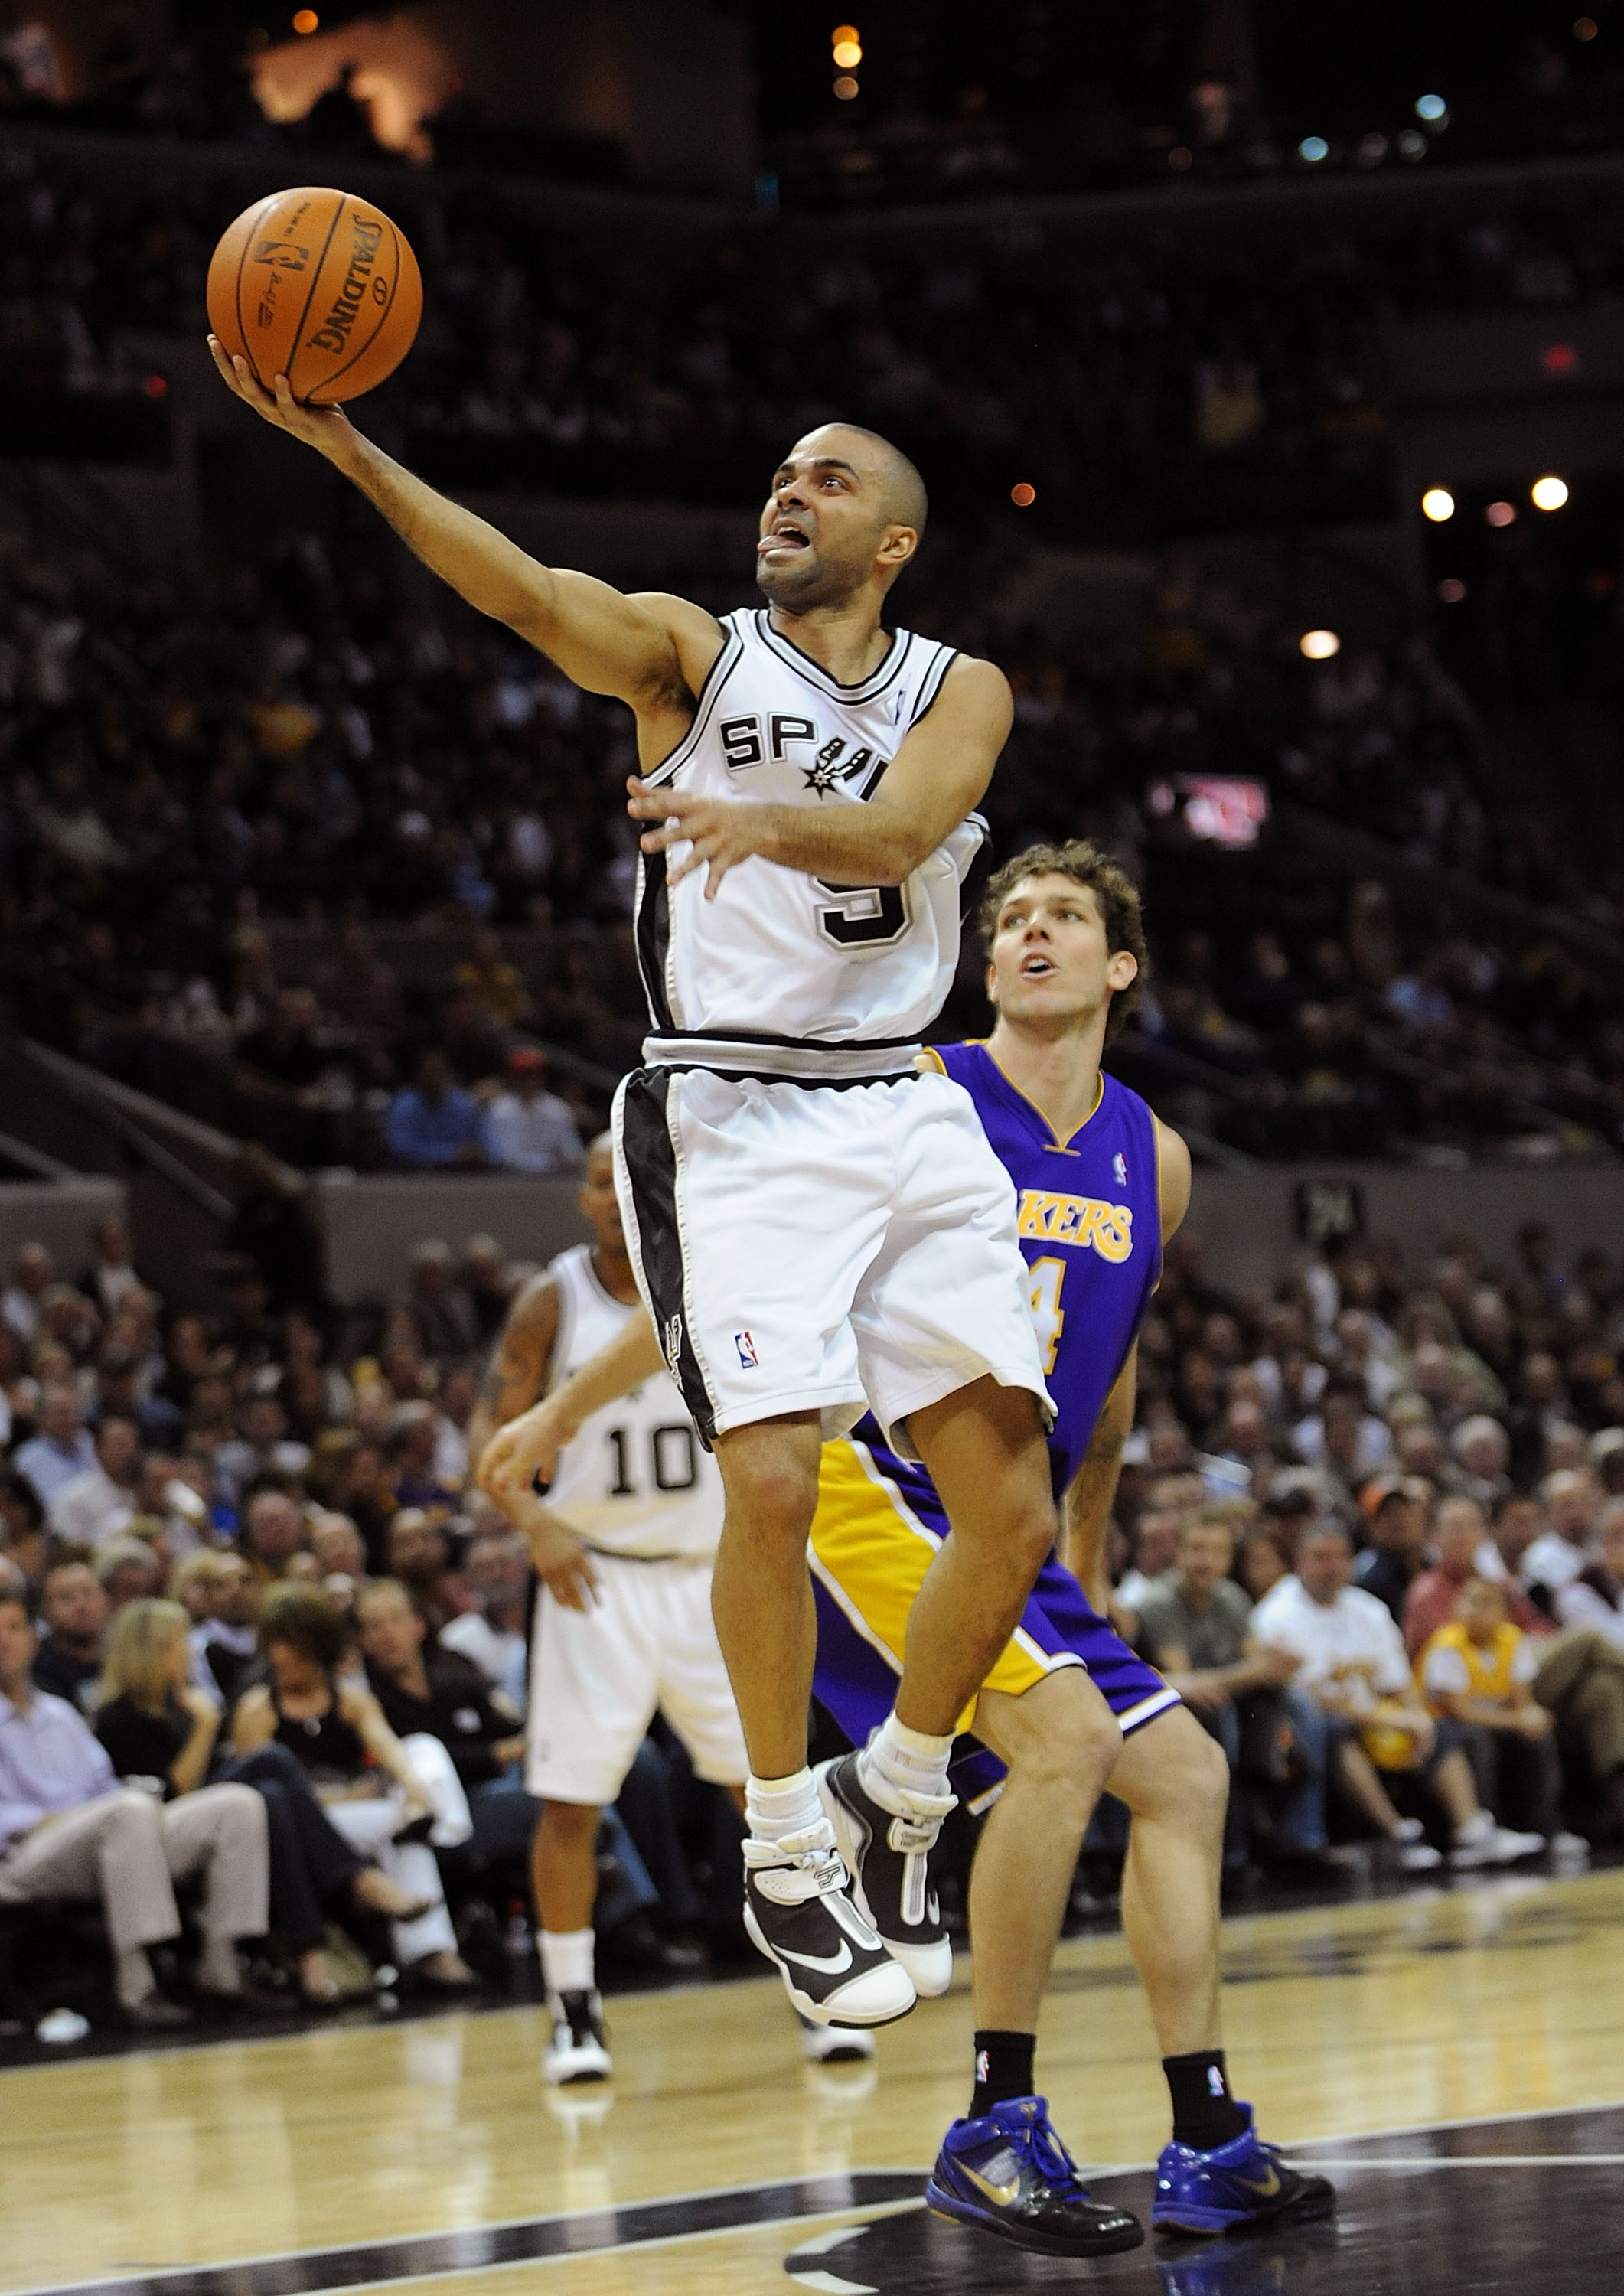 SAN ANTONIO - JANUARY 12:  Guard Tony Parker #9 of the San Antonio Spurs takes a shot against Luke Walton #4 of the Los Angeles Lakers on January 12, 2010 at AT&T Center in San Antonio, Texas.  NOTE TO USER: User expressly acknowledges and agrees that, by